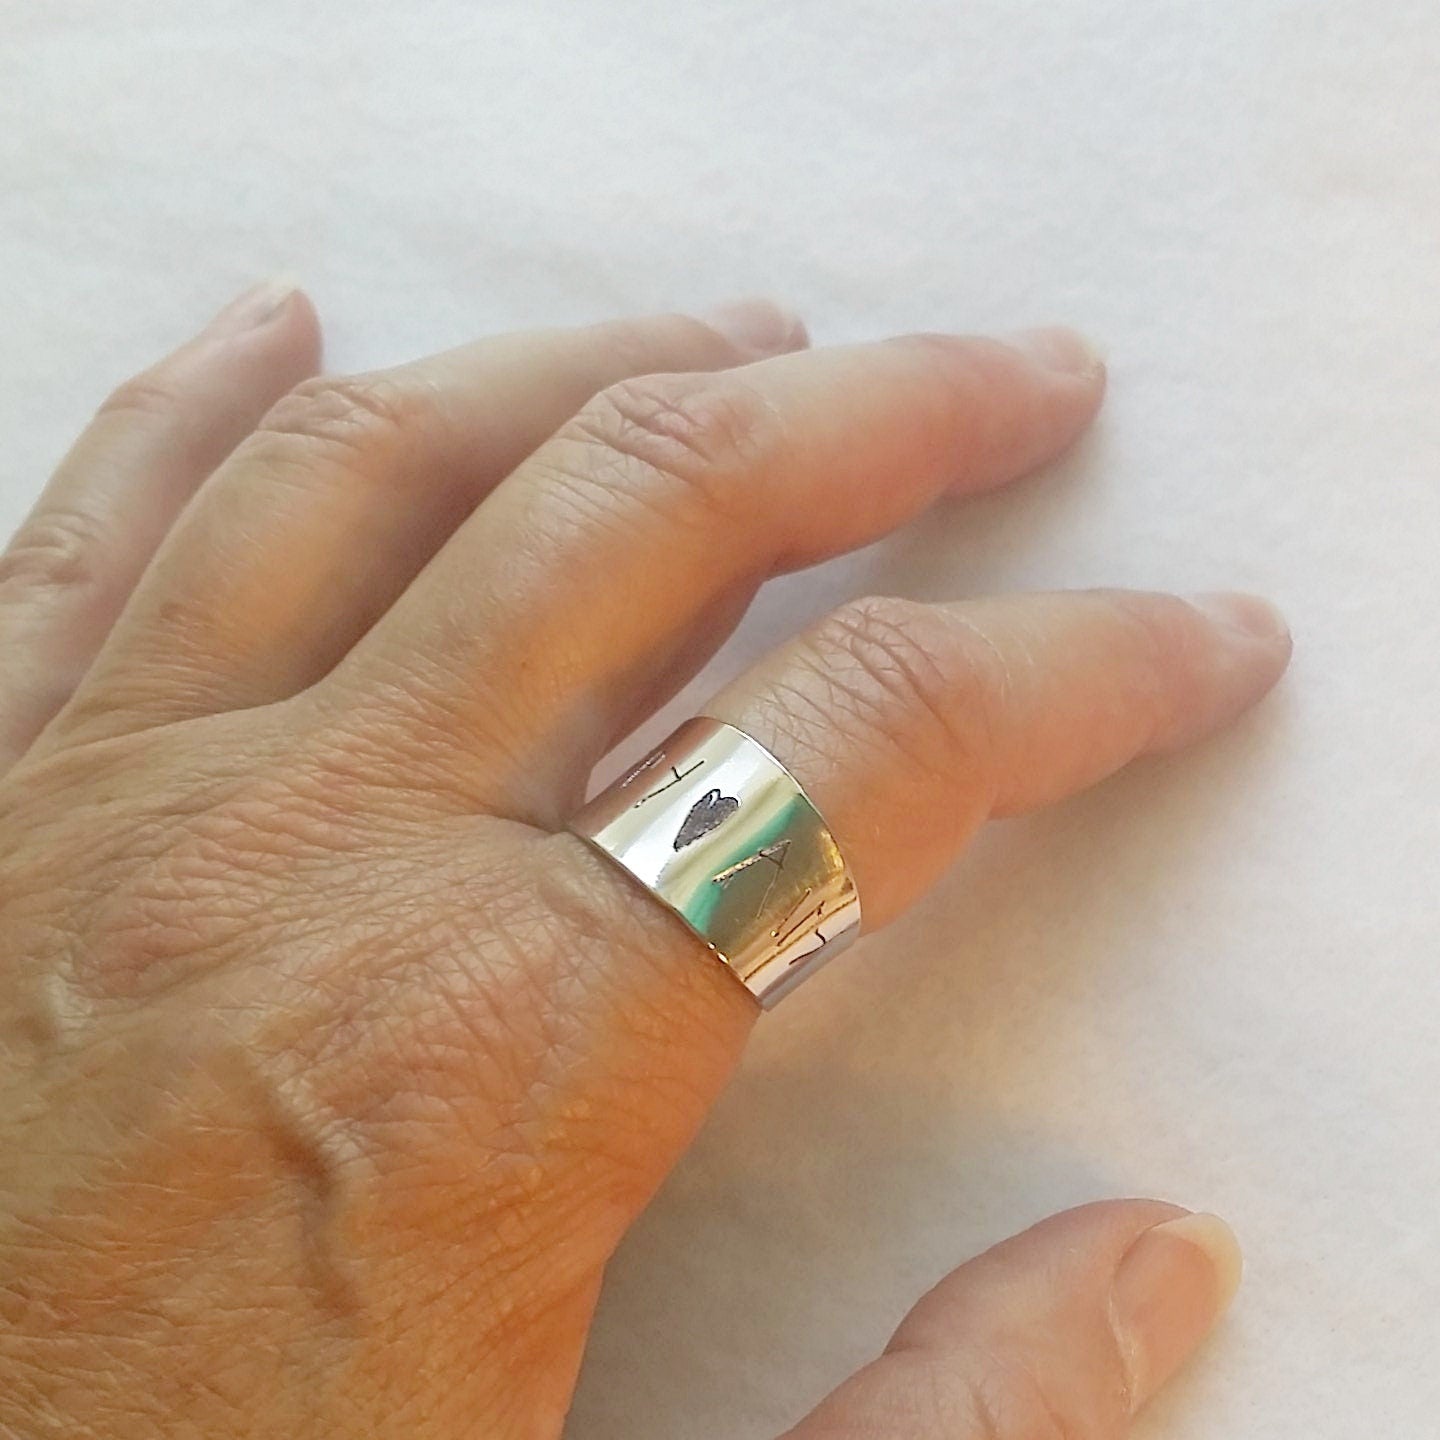 Actual Handwriting ring, engraved on silver/gold/rose gold band